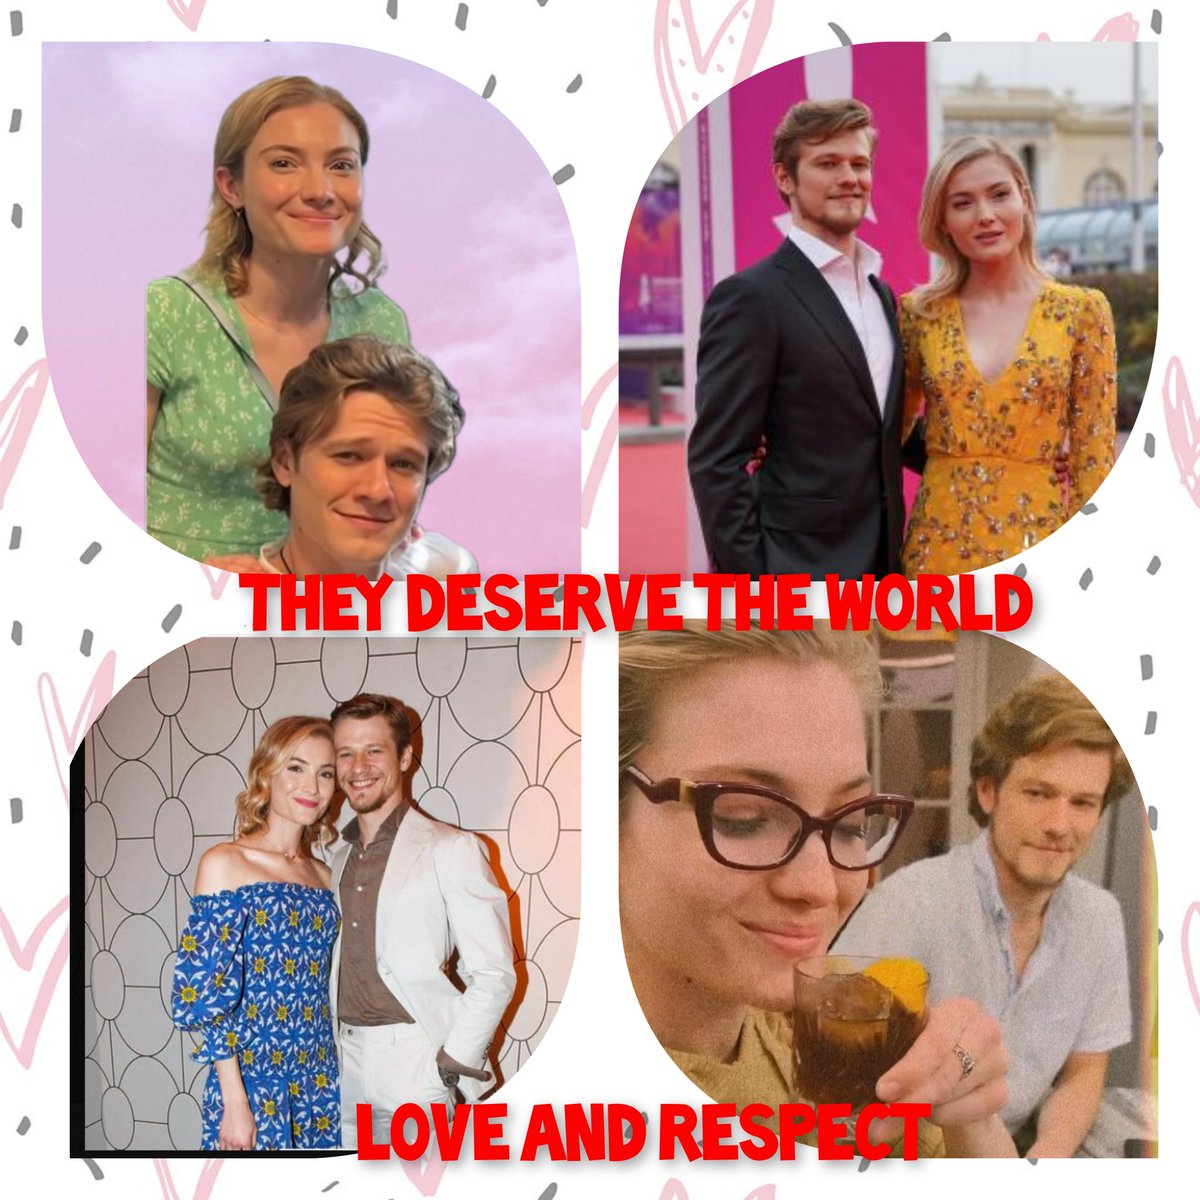 #lucastill #skylersamuels if you have nothing nice to say about them please don't say it